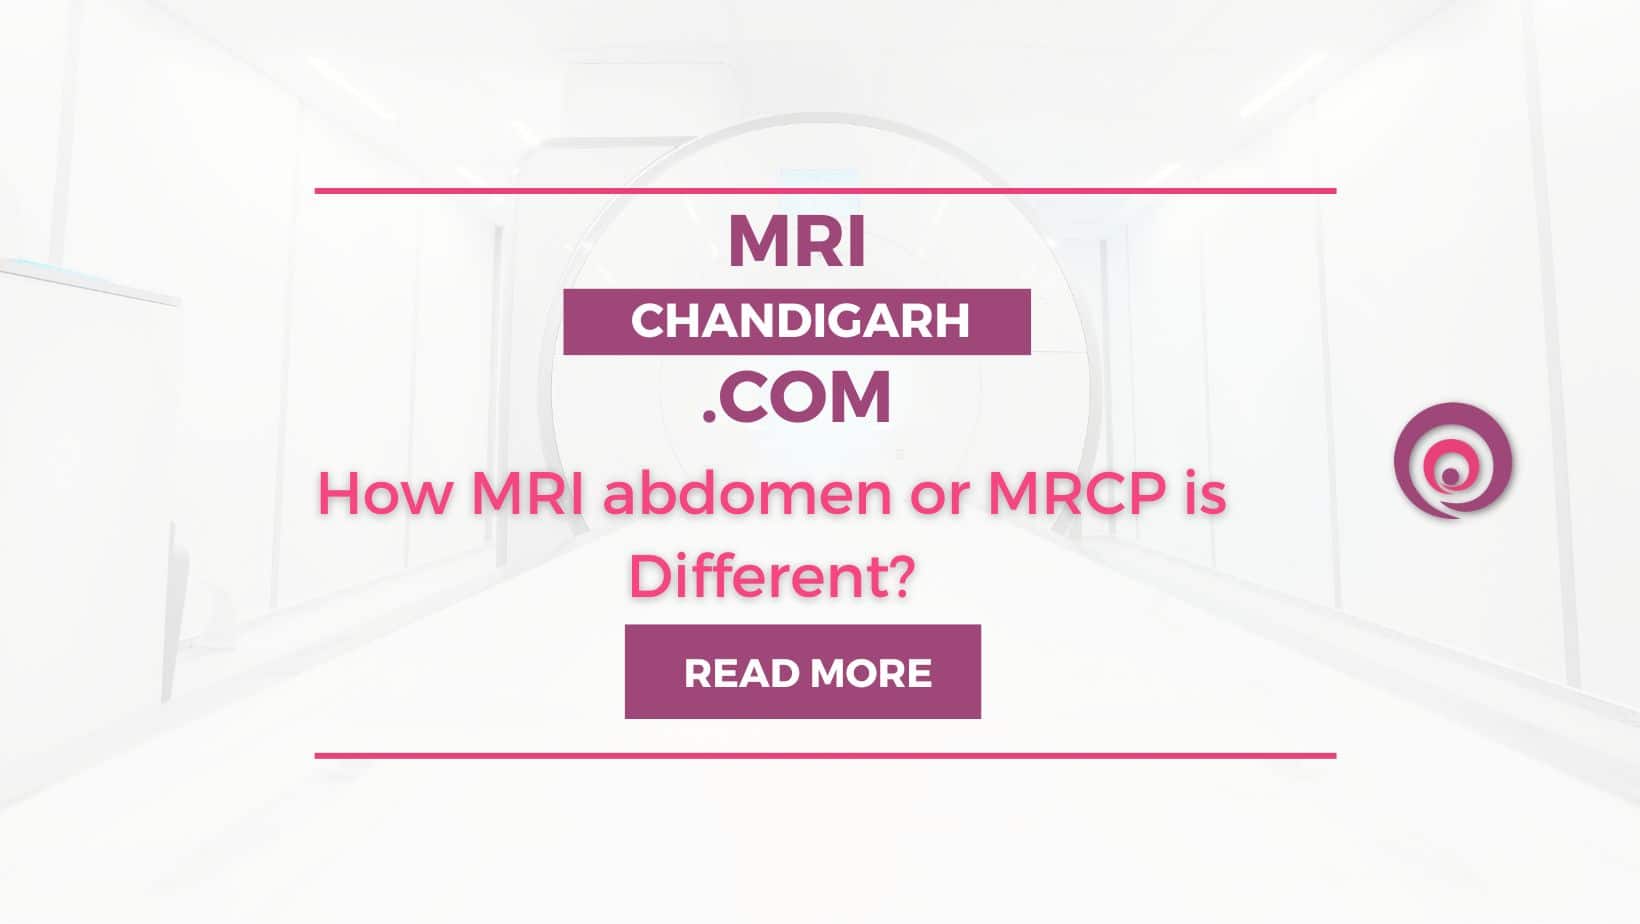 How MRI abdomen or MRCP is Different?